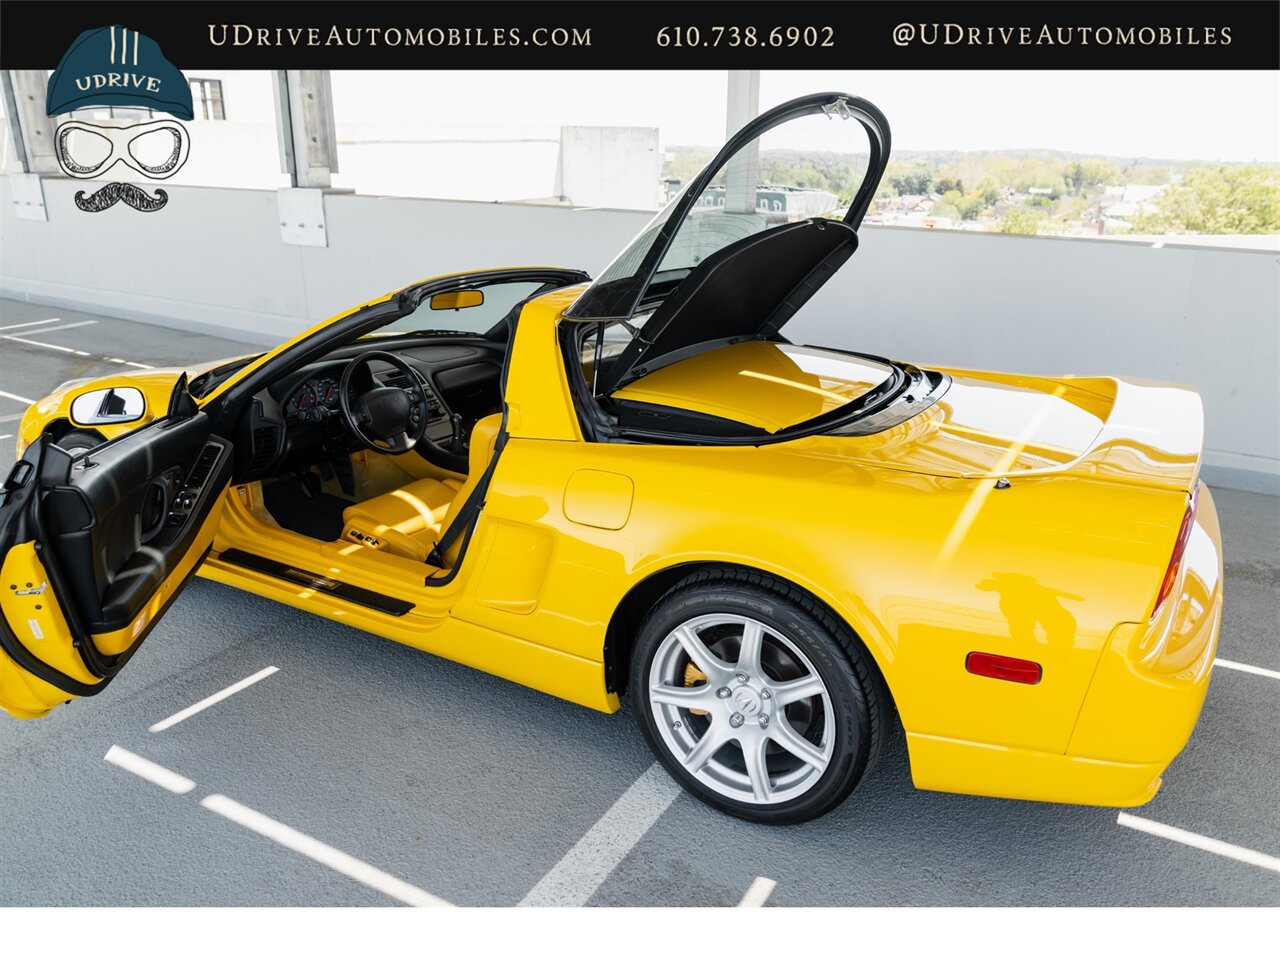 2003 Acura NSX NSX-T  Spa Yellow over Yellow Lthr 1 of 13 Produced - Photo 44 - West Chester, PA 19382